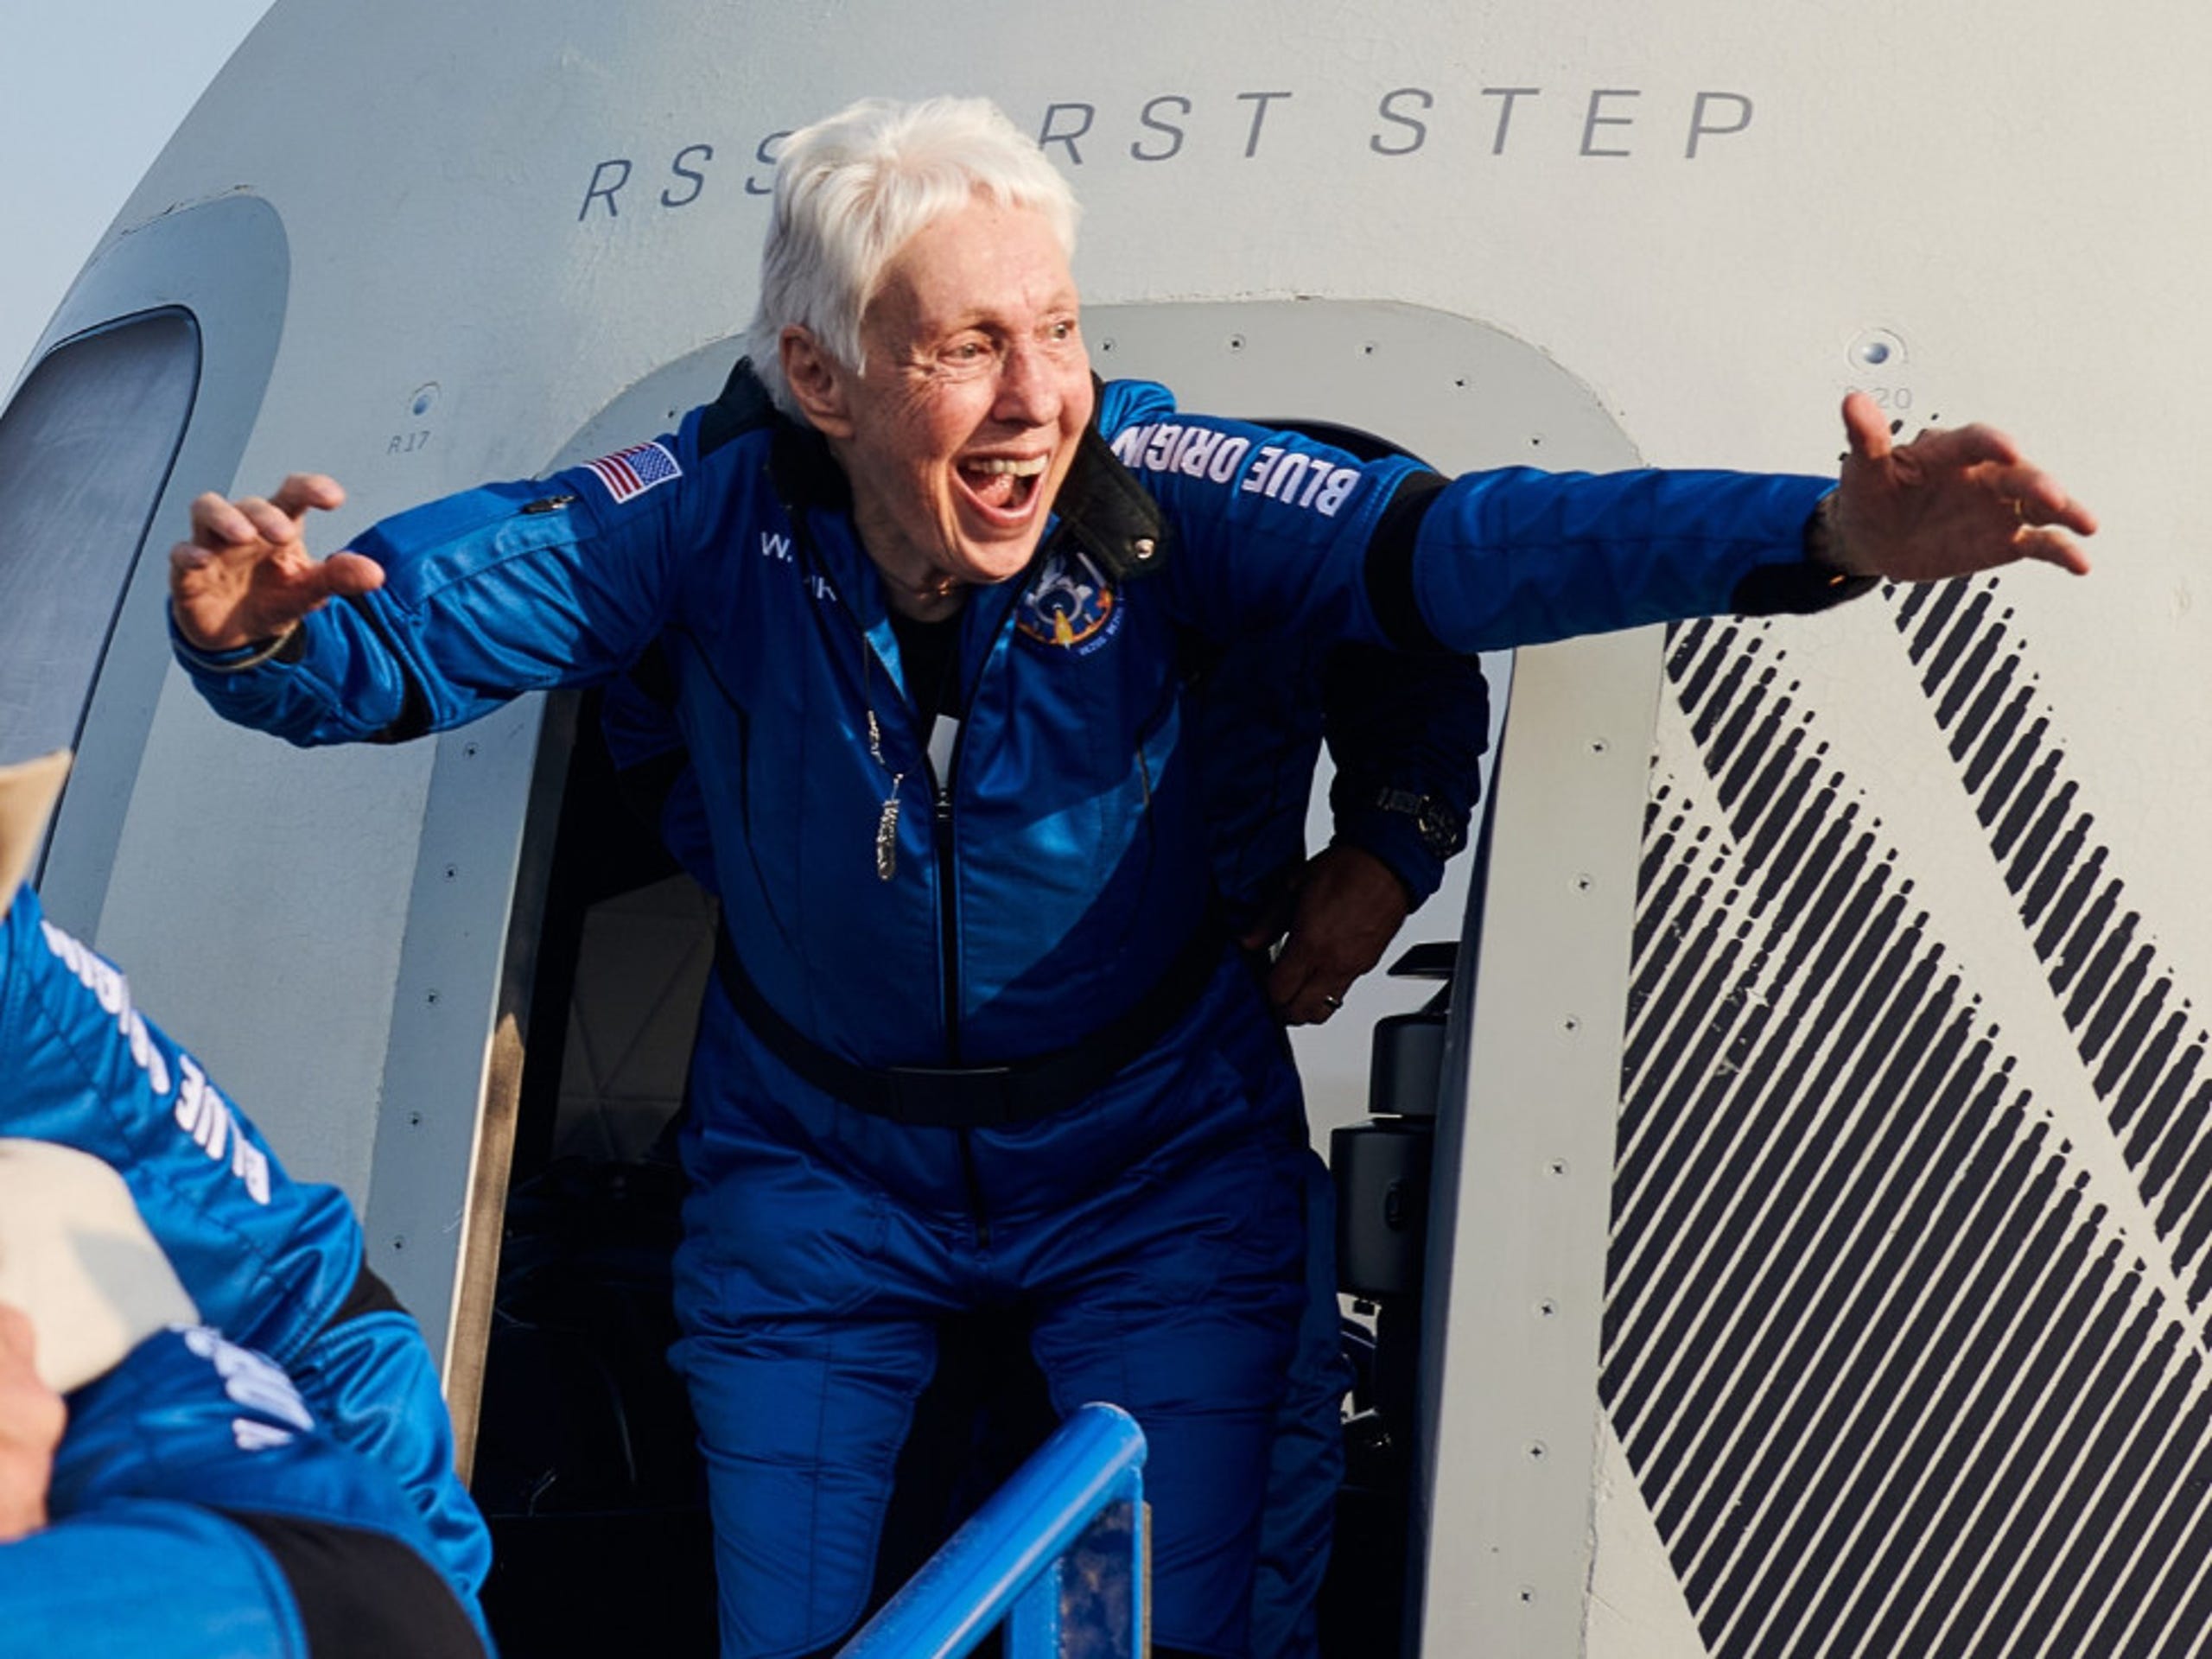 The 82-year-old Wally Funk became the oldest person to go to space on July 20.